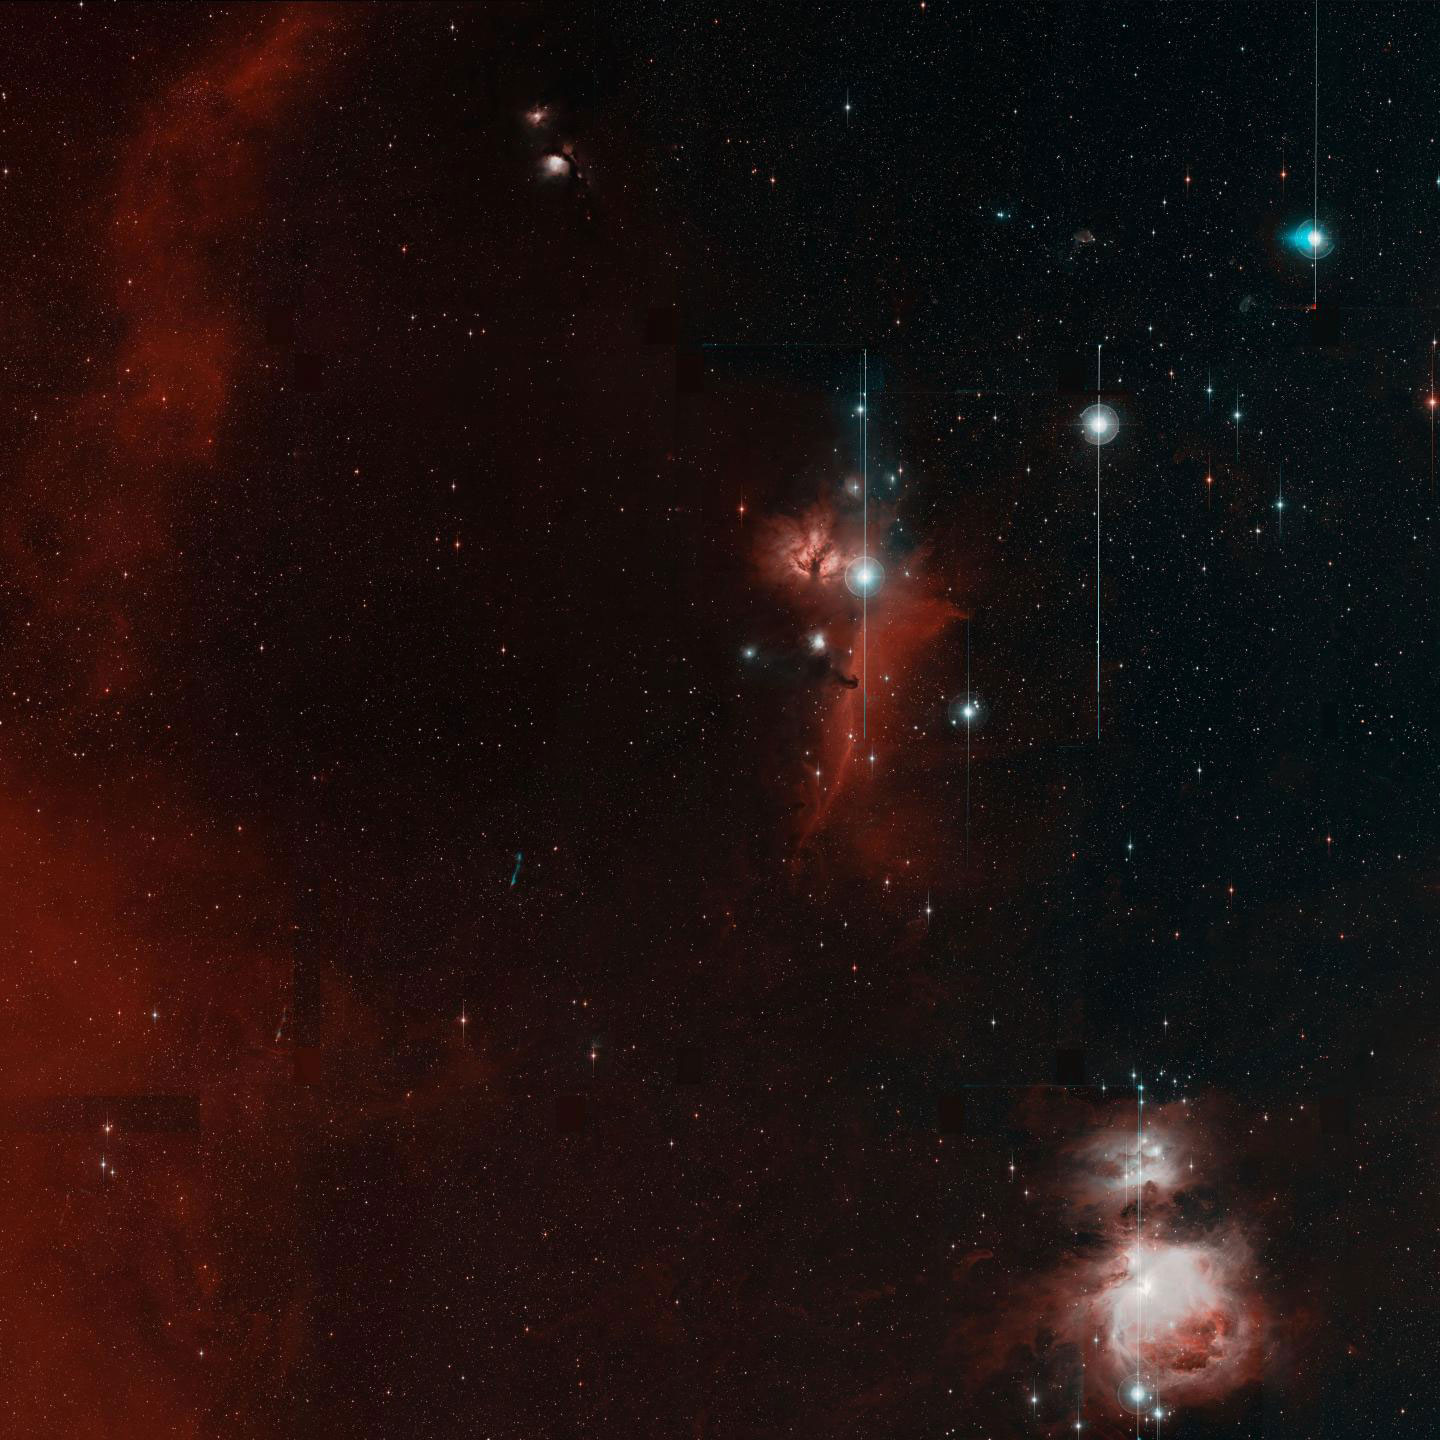 Zwicky Transient Facility (ZTF) Takes Its First Image of the